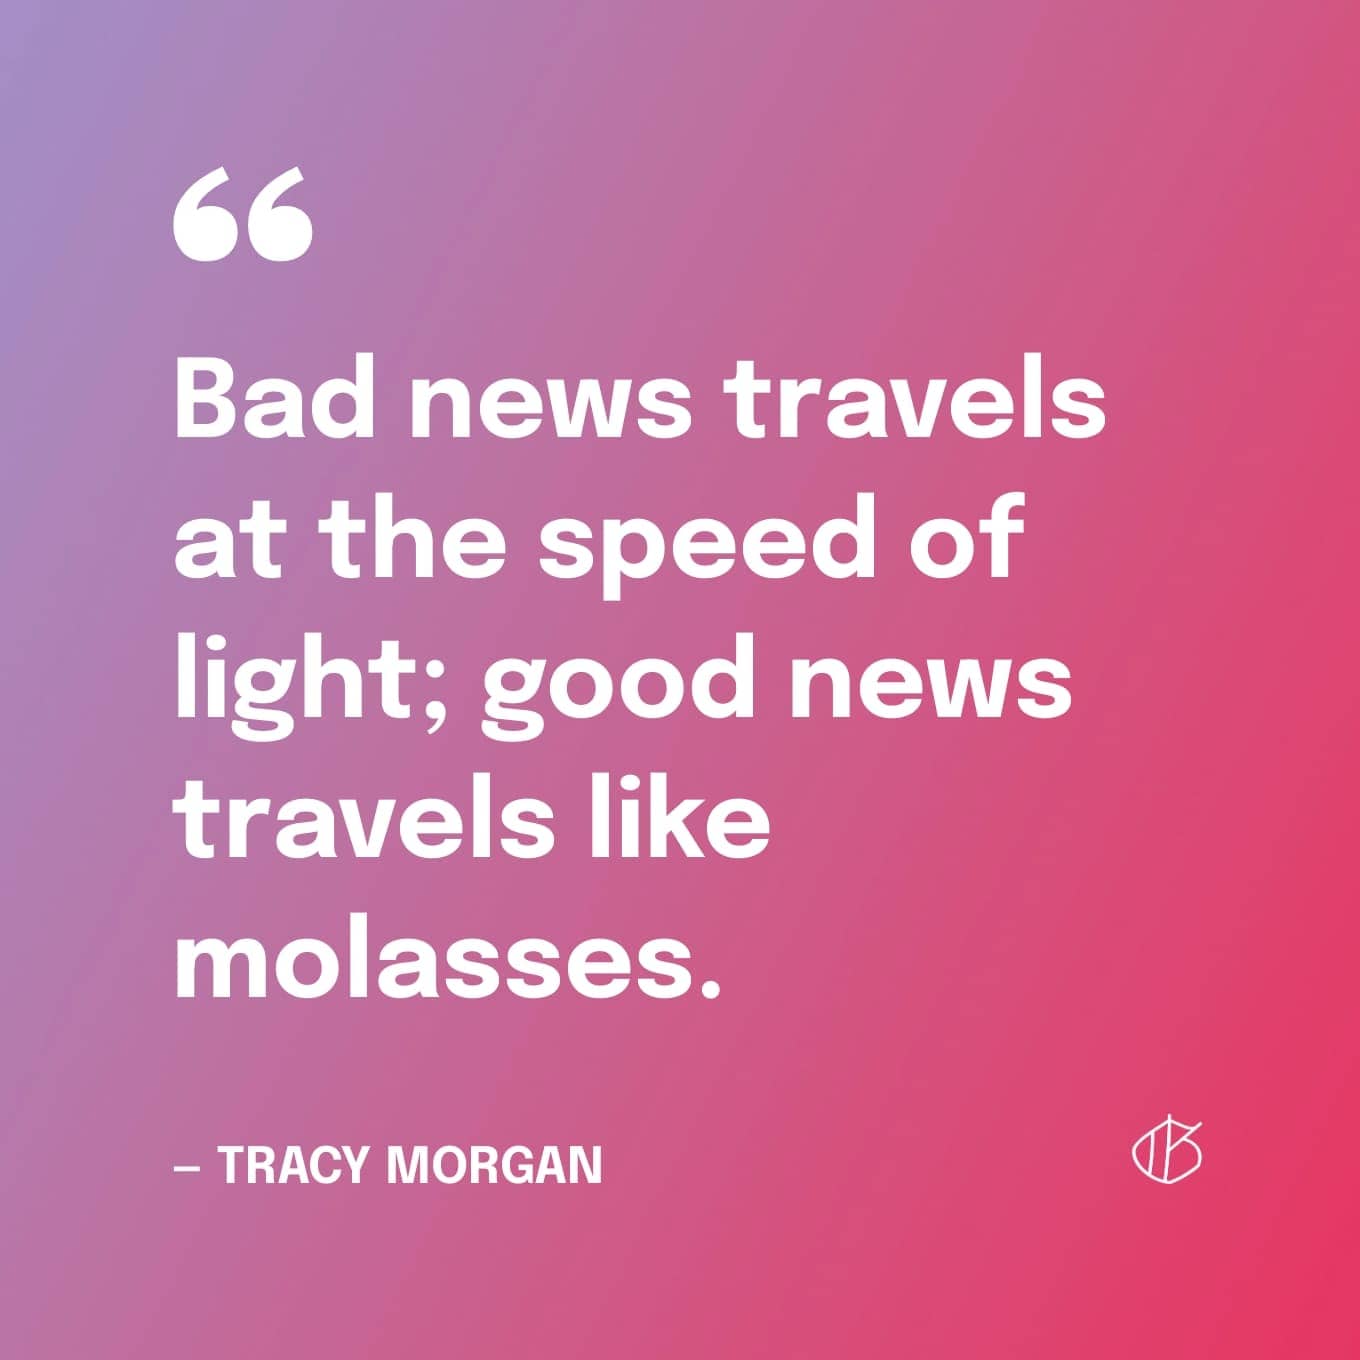 Positive News Quote: “Bad news travels at the speed of light; good news travels like molasses.” — Tracy Morgan